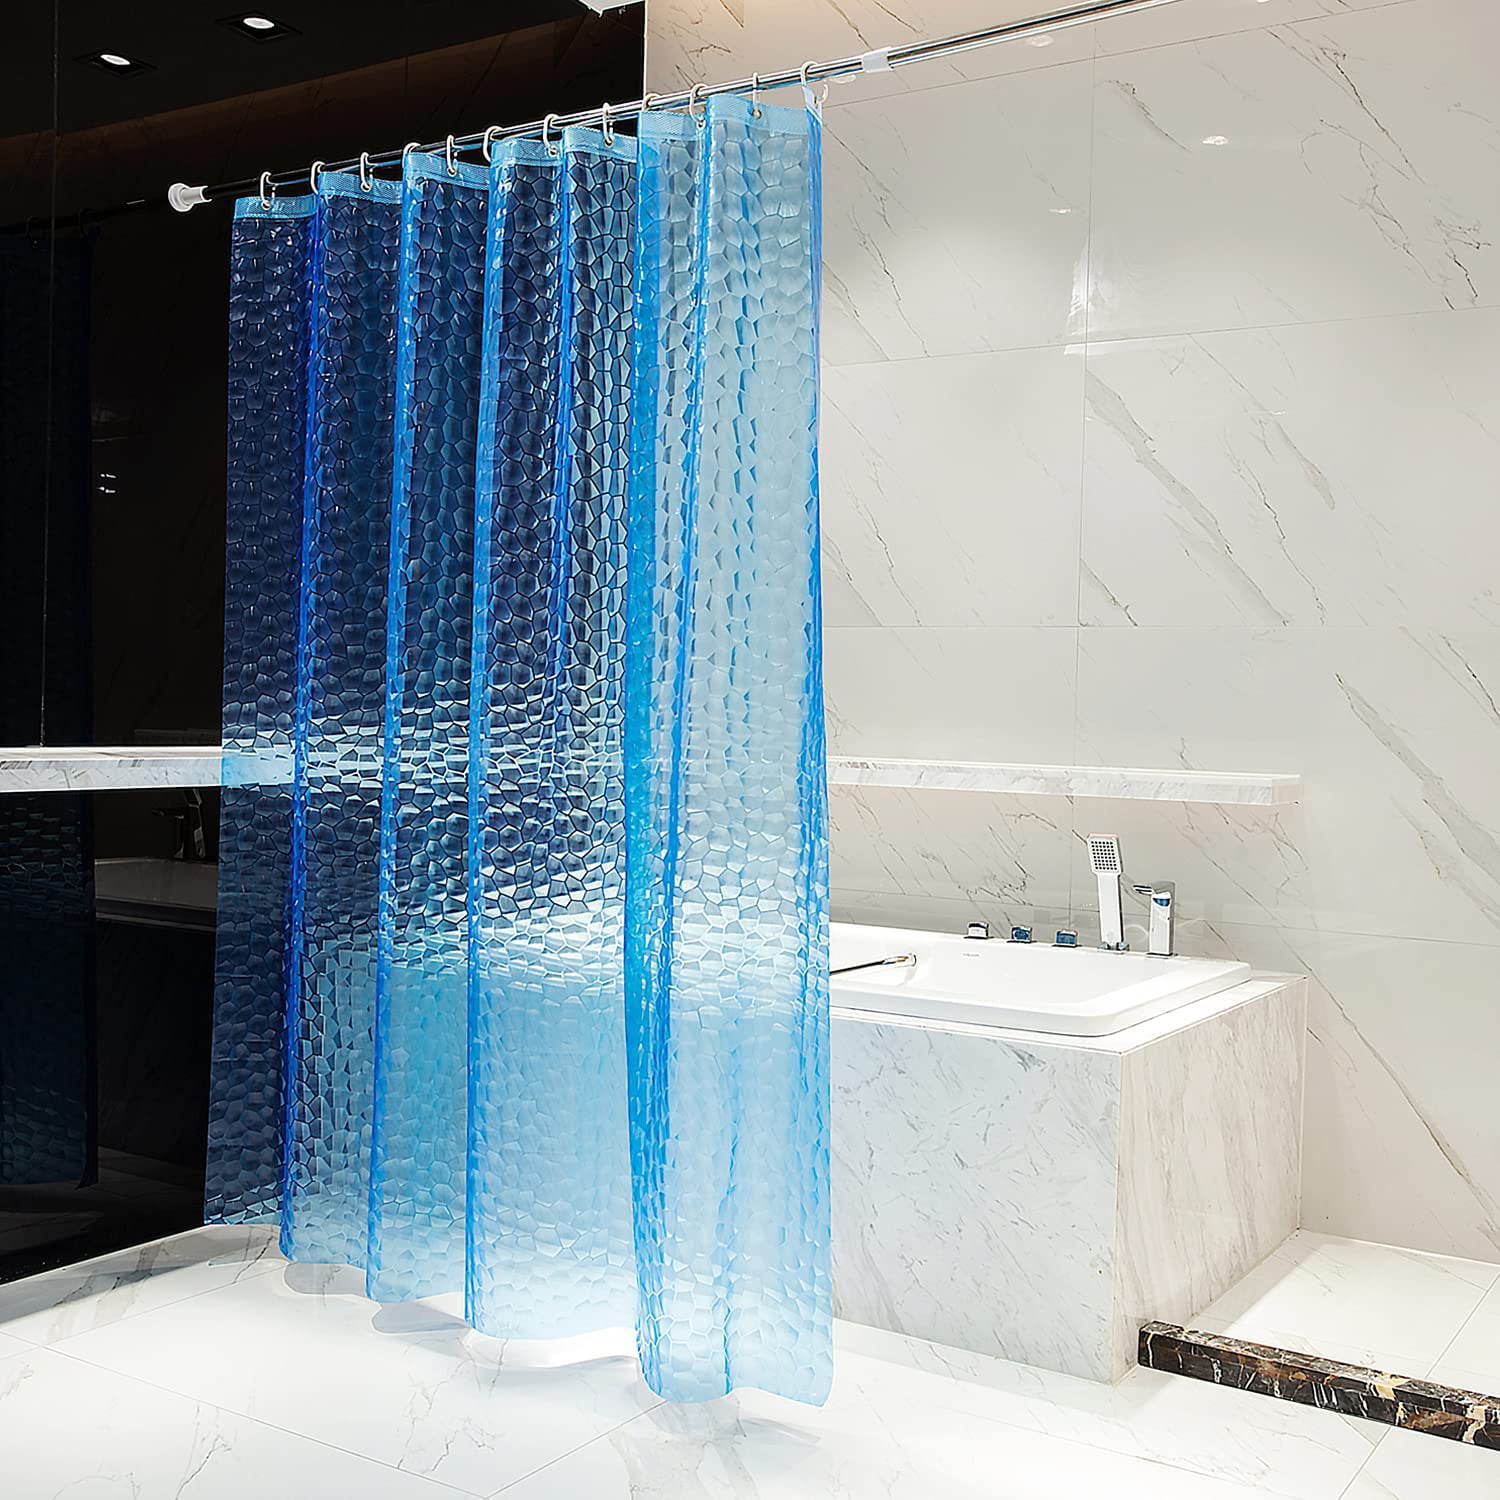 Details about   New 3D Printed Long Shower Curtain Waterproof Polyester Bathroom Shower Curtains 